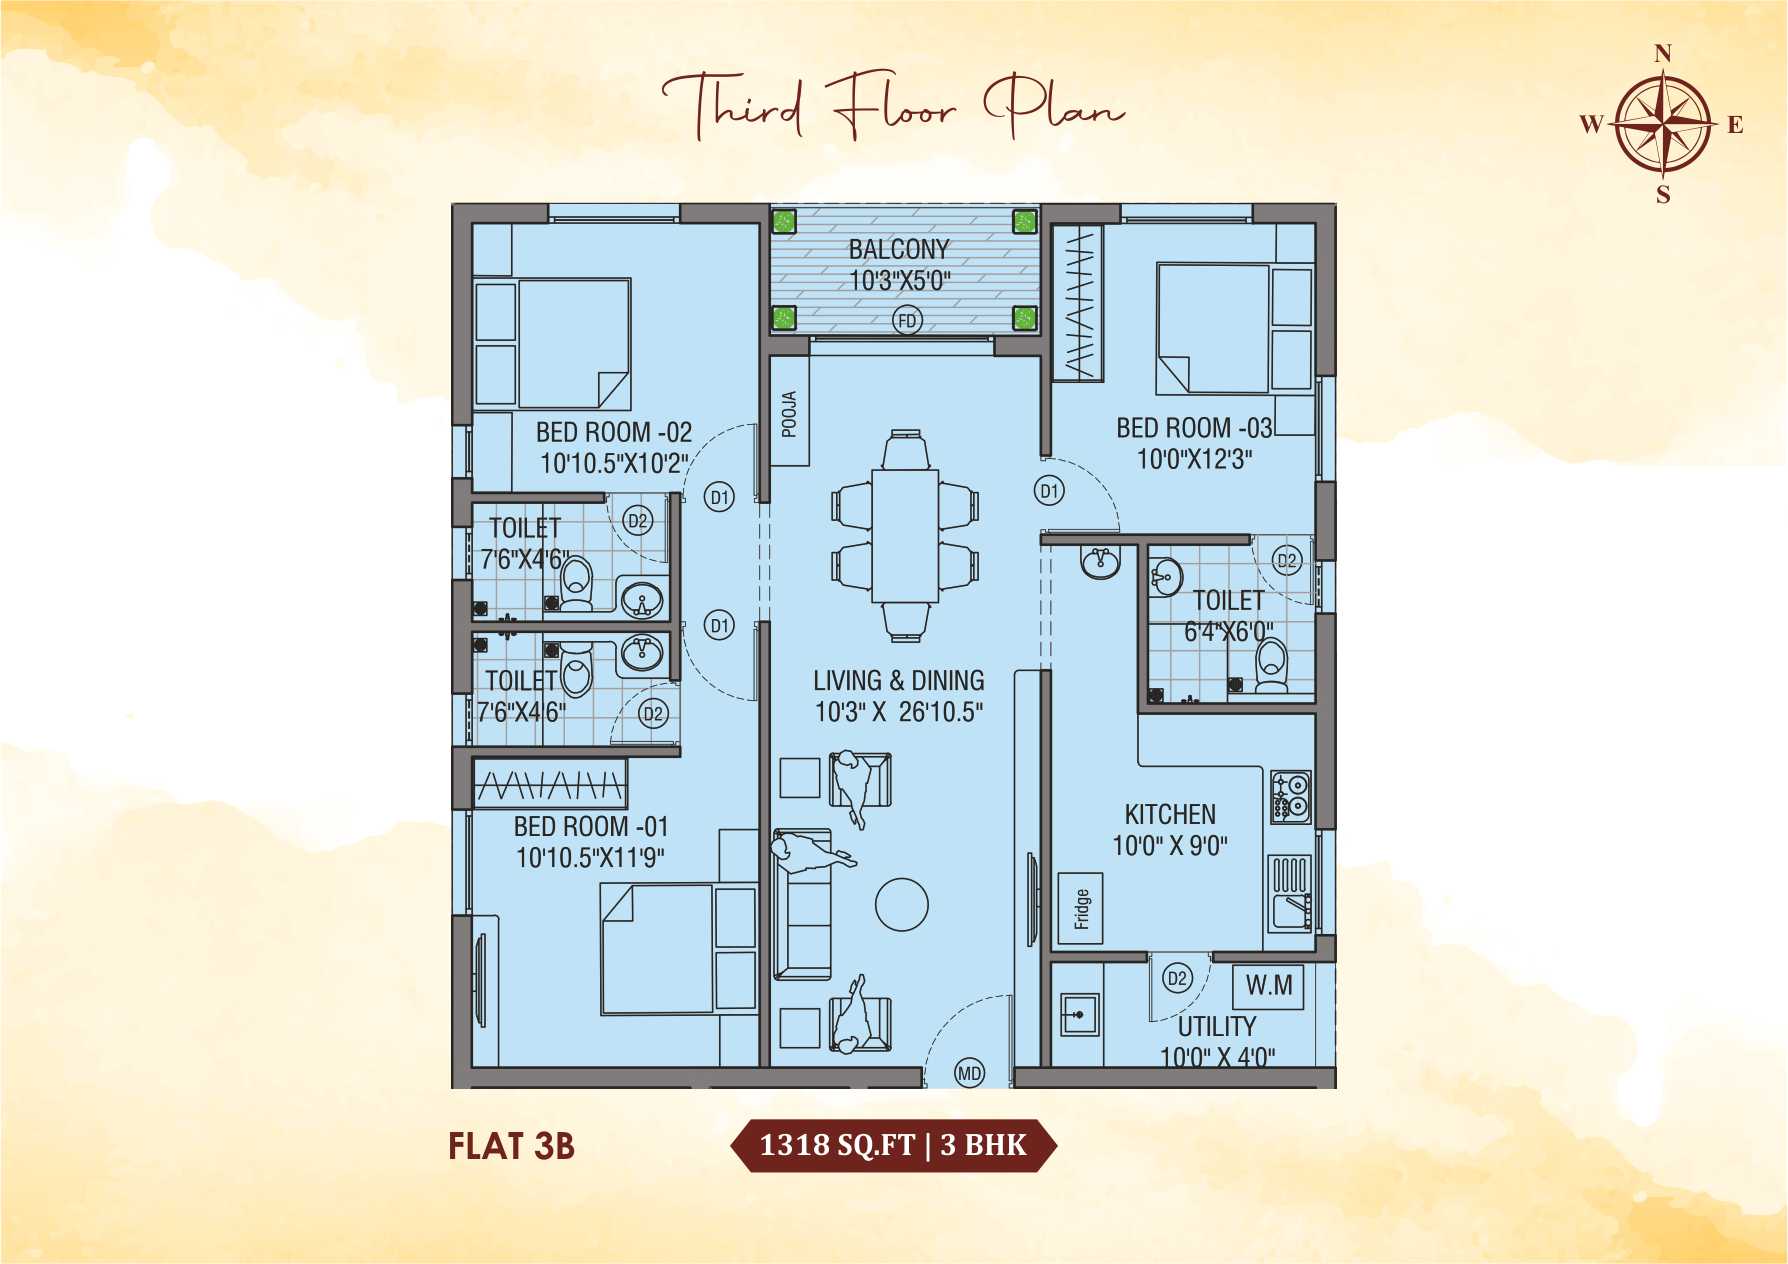 https://firmfoundations.in/projects/floorplans/thumbnails/16954468022Thayagam_3rd.jpg